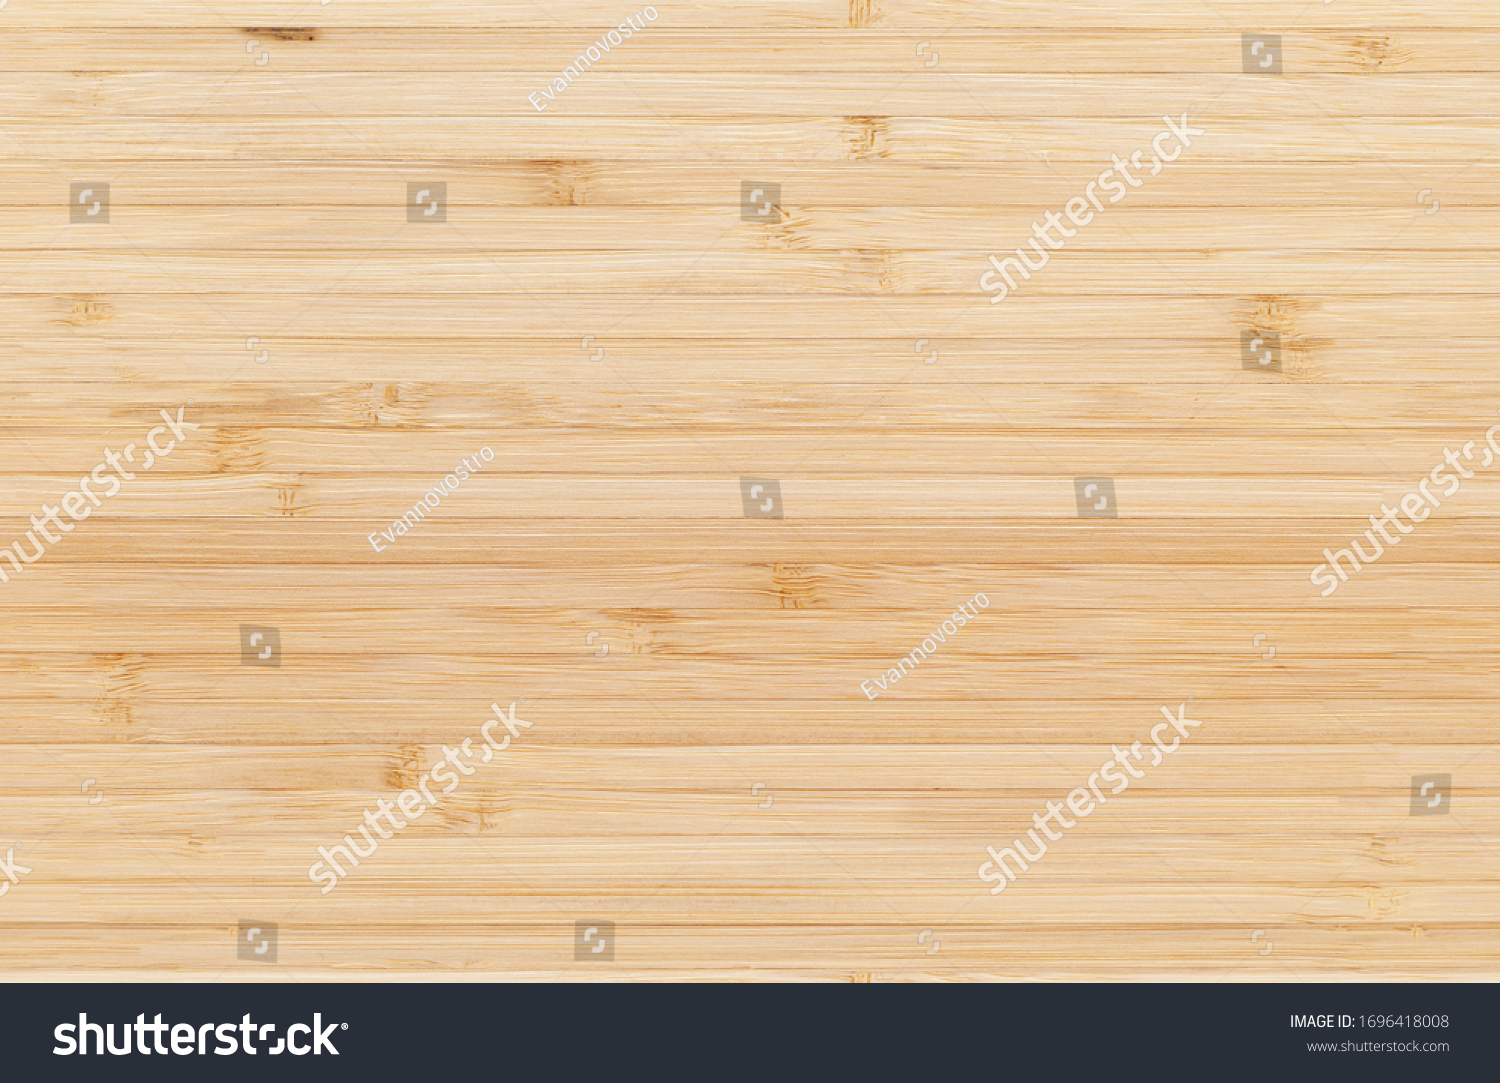 New clean bamboo board with striped pattern, seamless background photo texture #1696418008